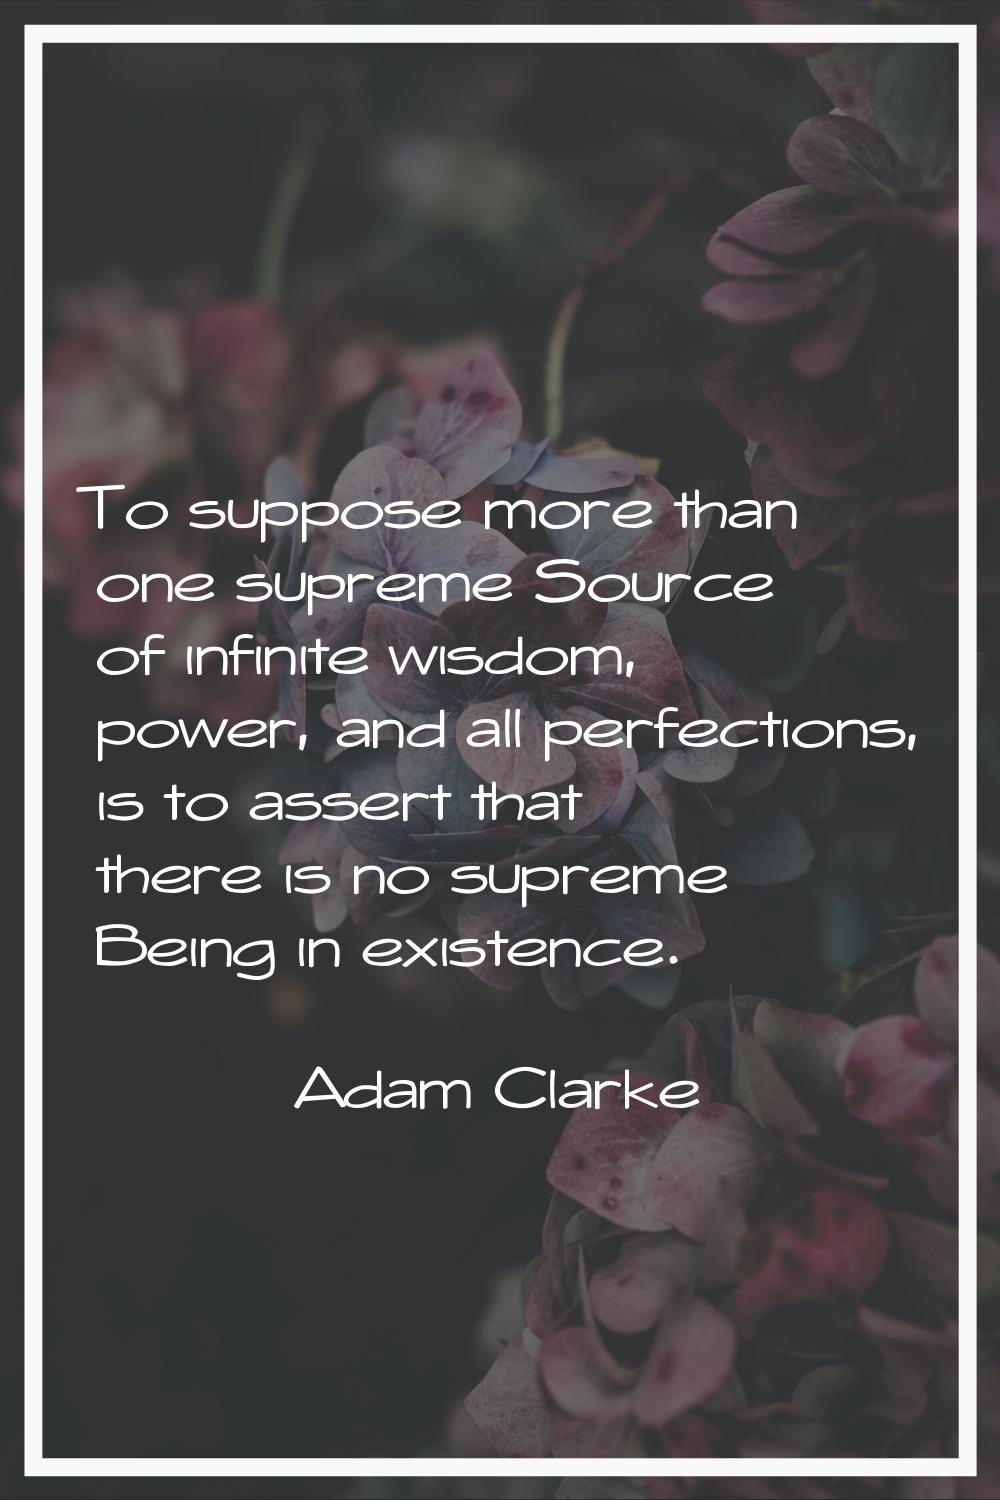 To suppose more than one supreme Source of infinite wisdom, power, and all perfections, is to asser